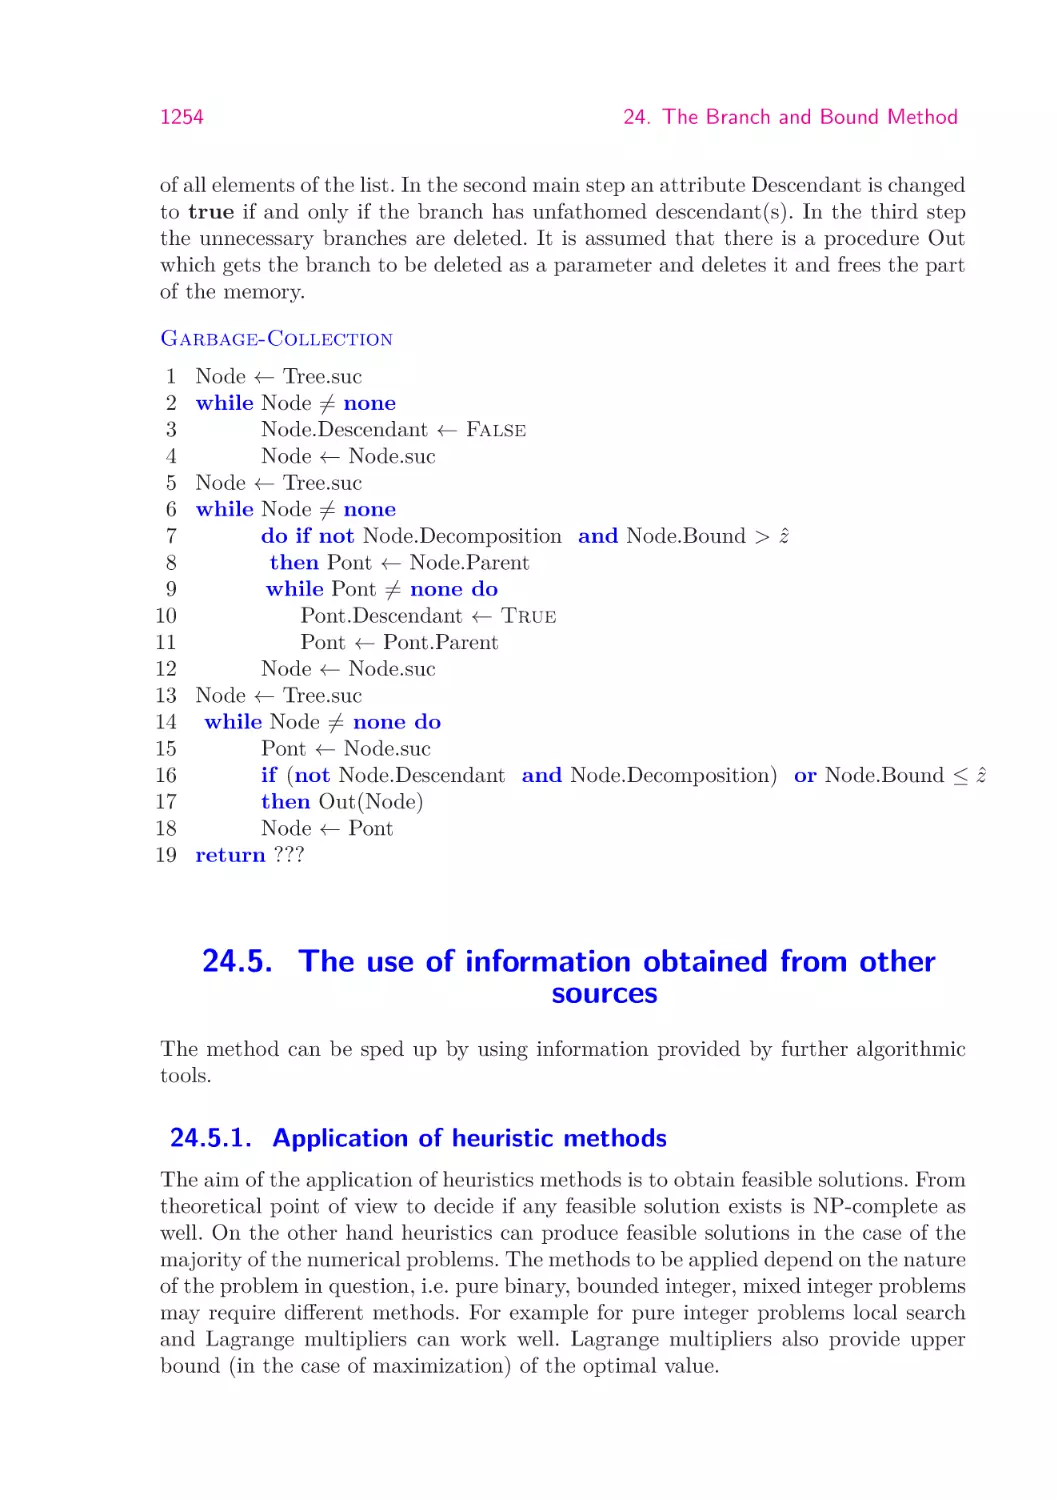 24.5.  The use of information obtained from other sources
24.5.1.  Application of heuristic methods